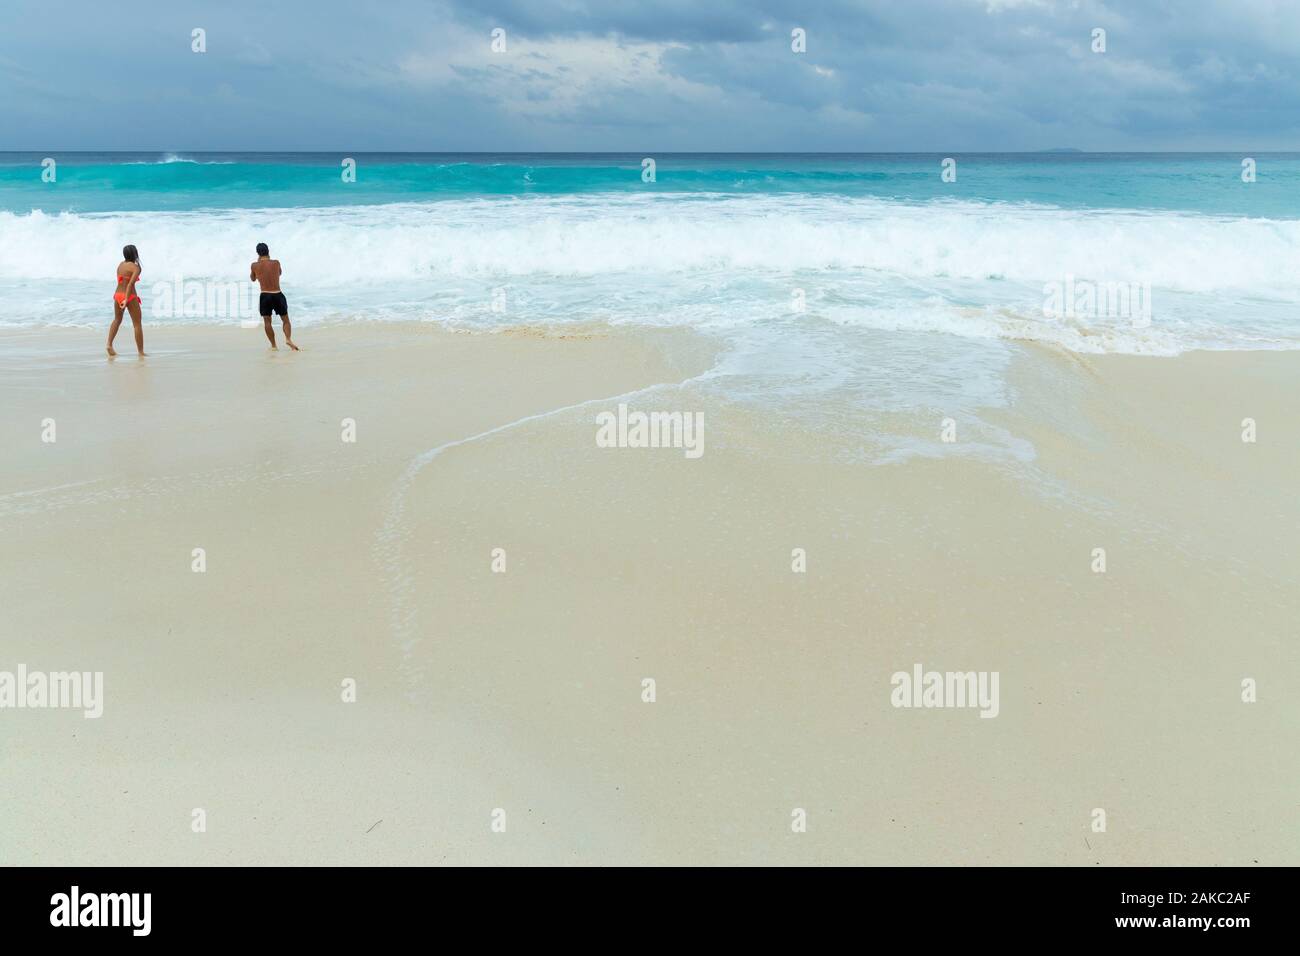 Seychelles, La Digue Island, swimmers in the waves on the beach of the cove Stock Photo